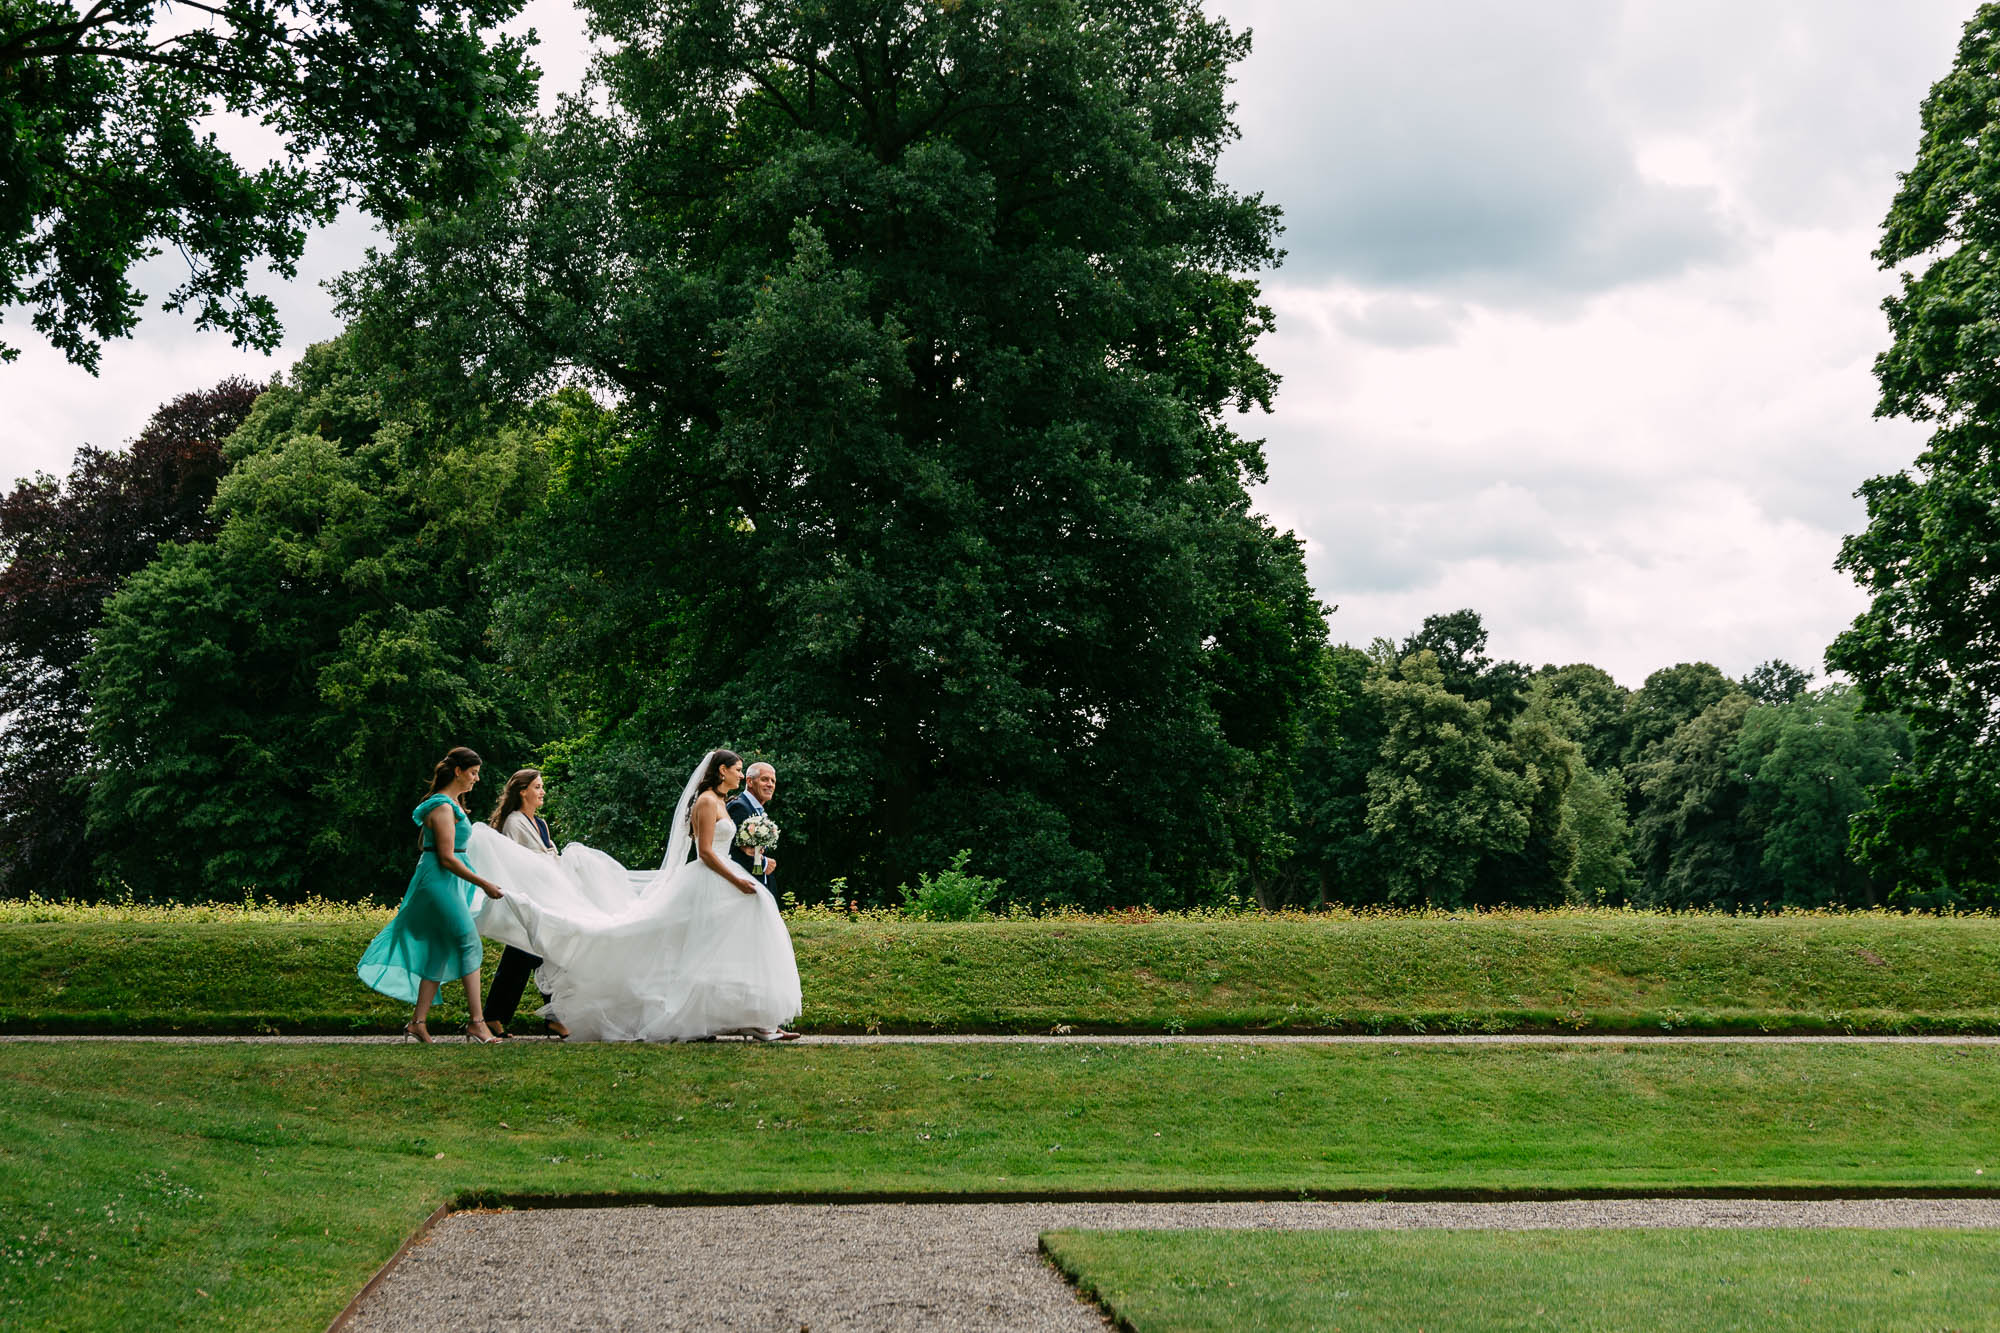 A bride and her master of ceremonies walk through a park.